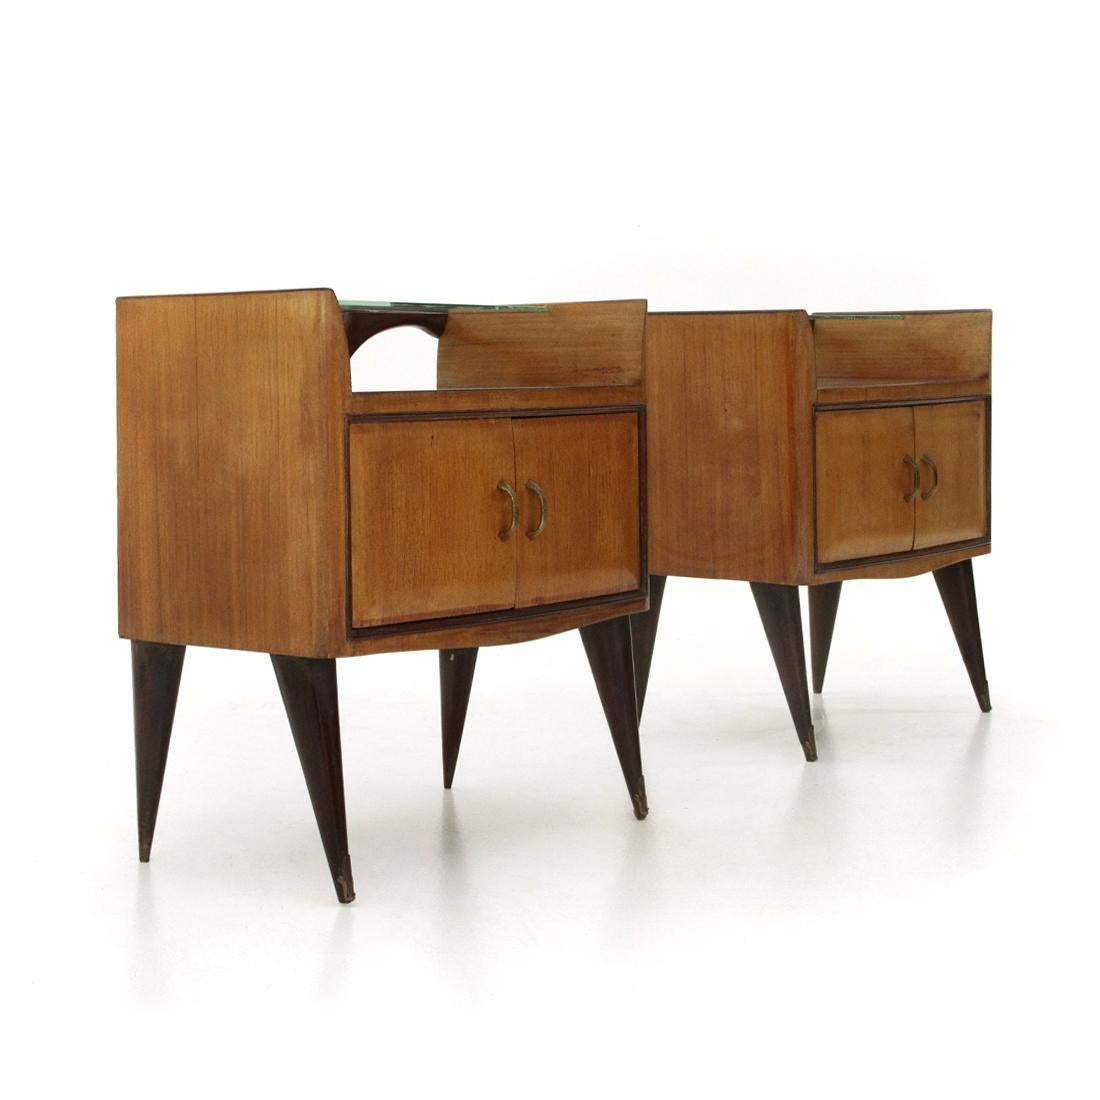 Mid-Century Modern Pair of Bedside Tables with Glass Shelf, 1950s